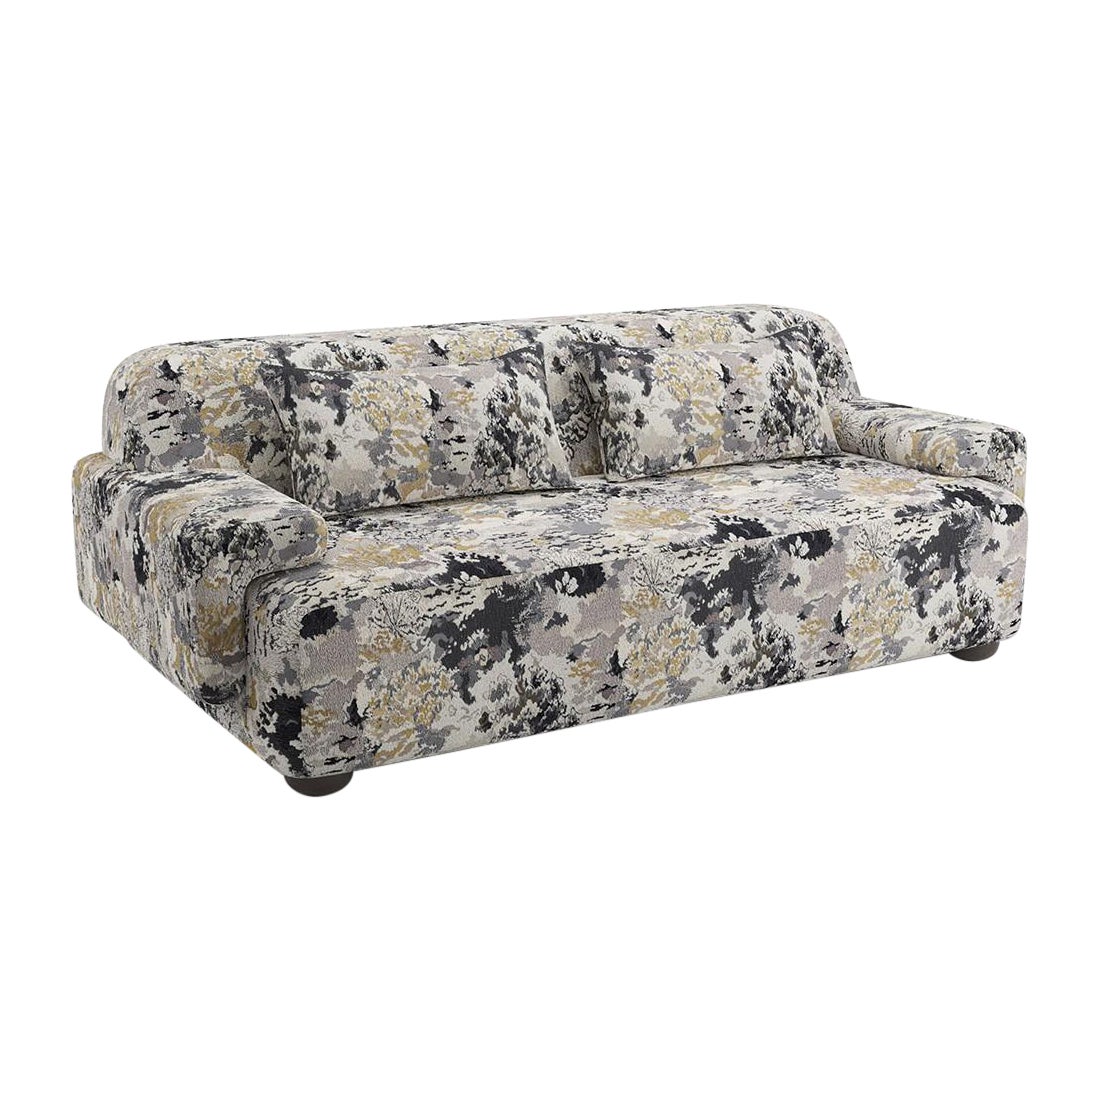 Popus Editions Lena 2.5 Seater Sofa in Charcoal Marrakech Jacquard Upholstery For Sale